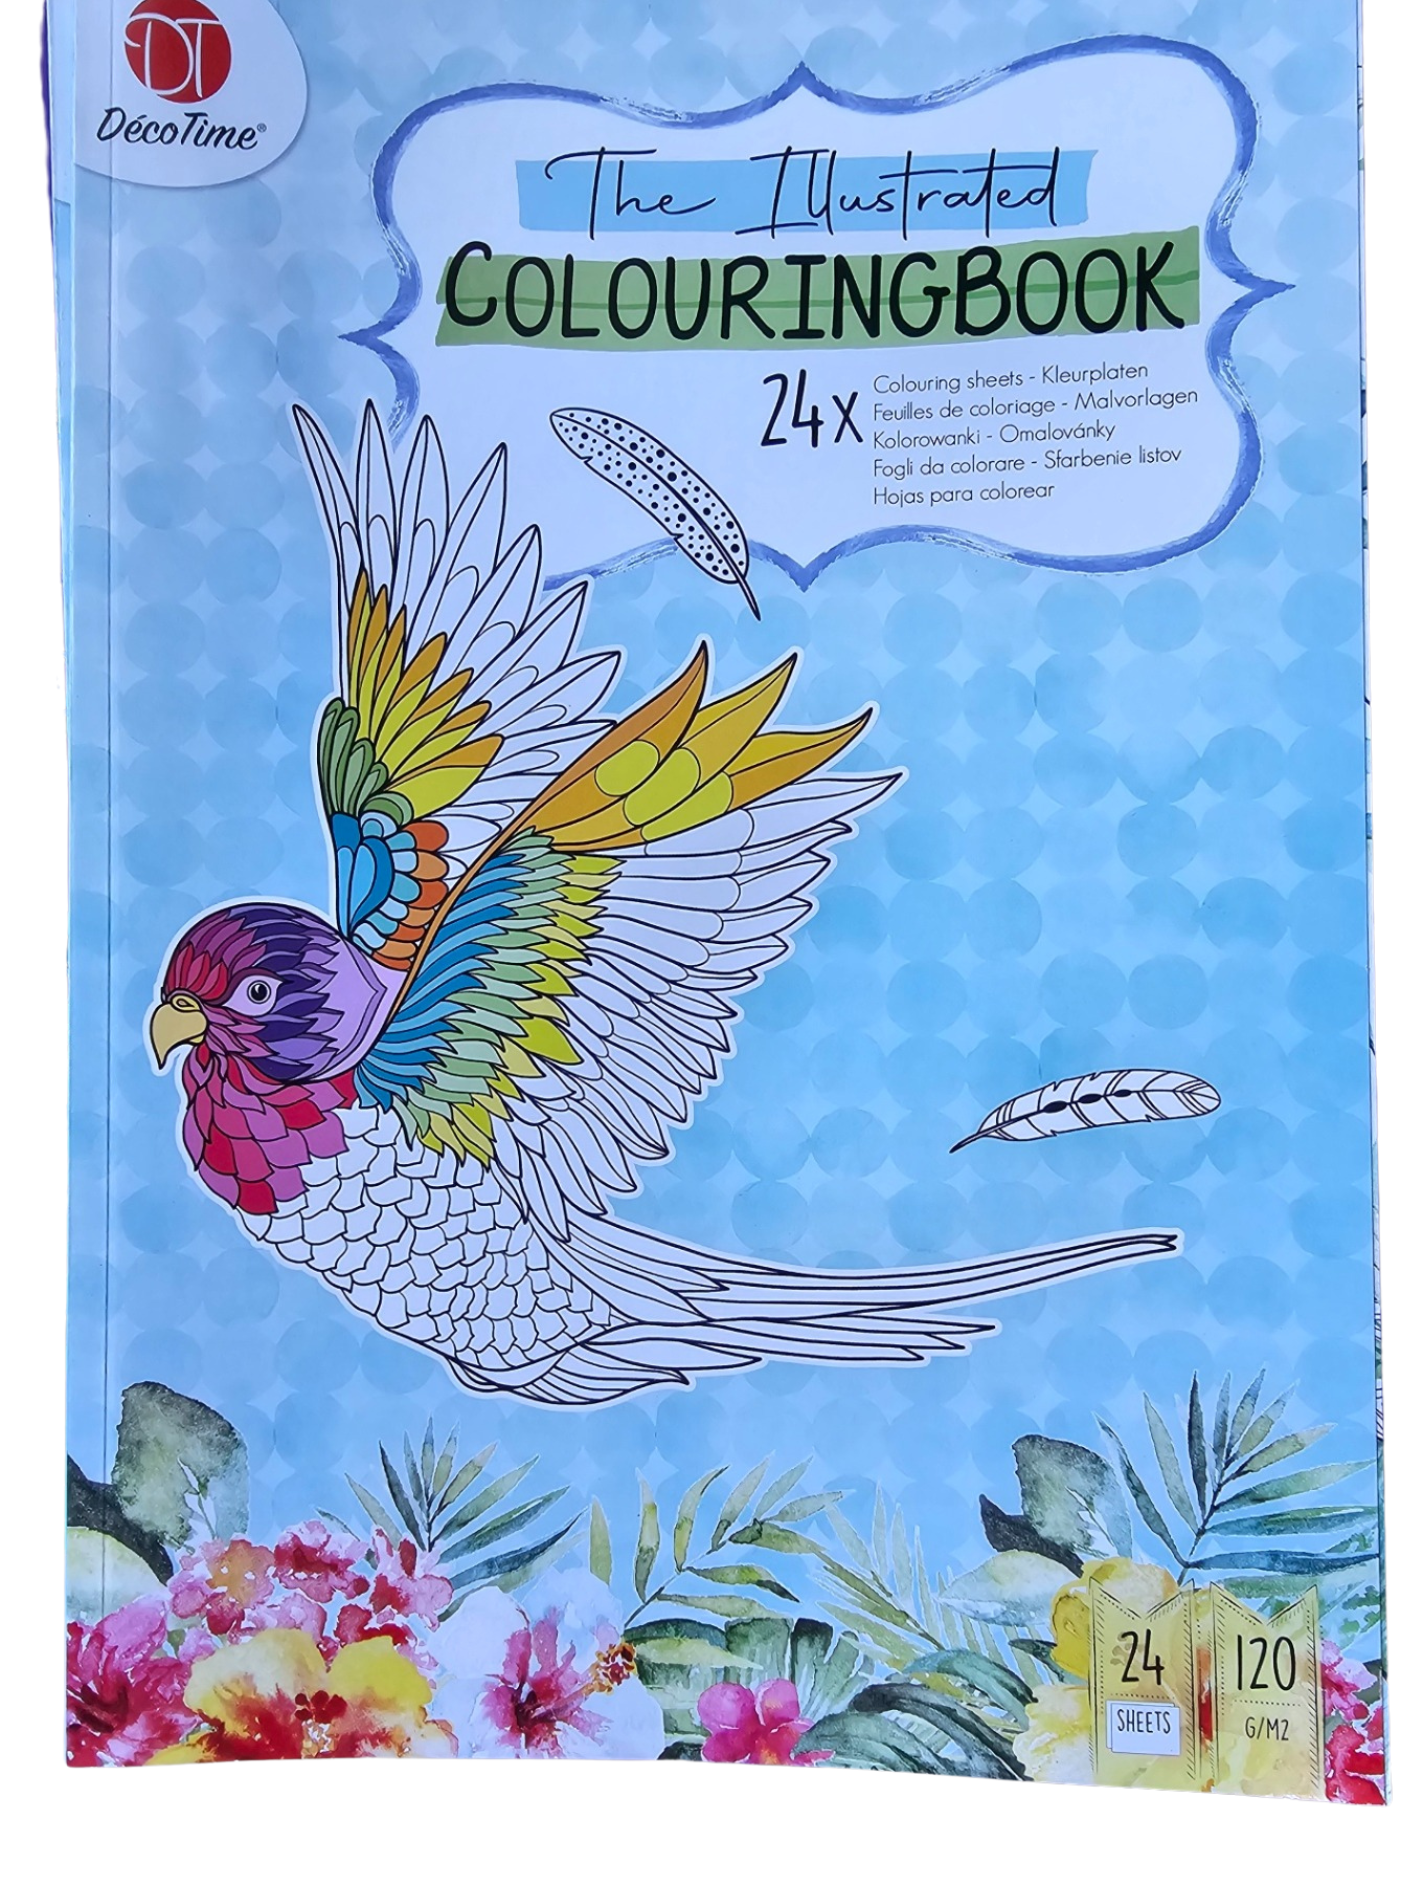 Illustrated Colouring Books by Decotime